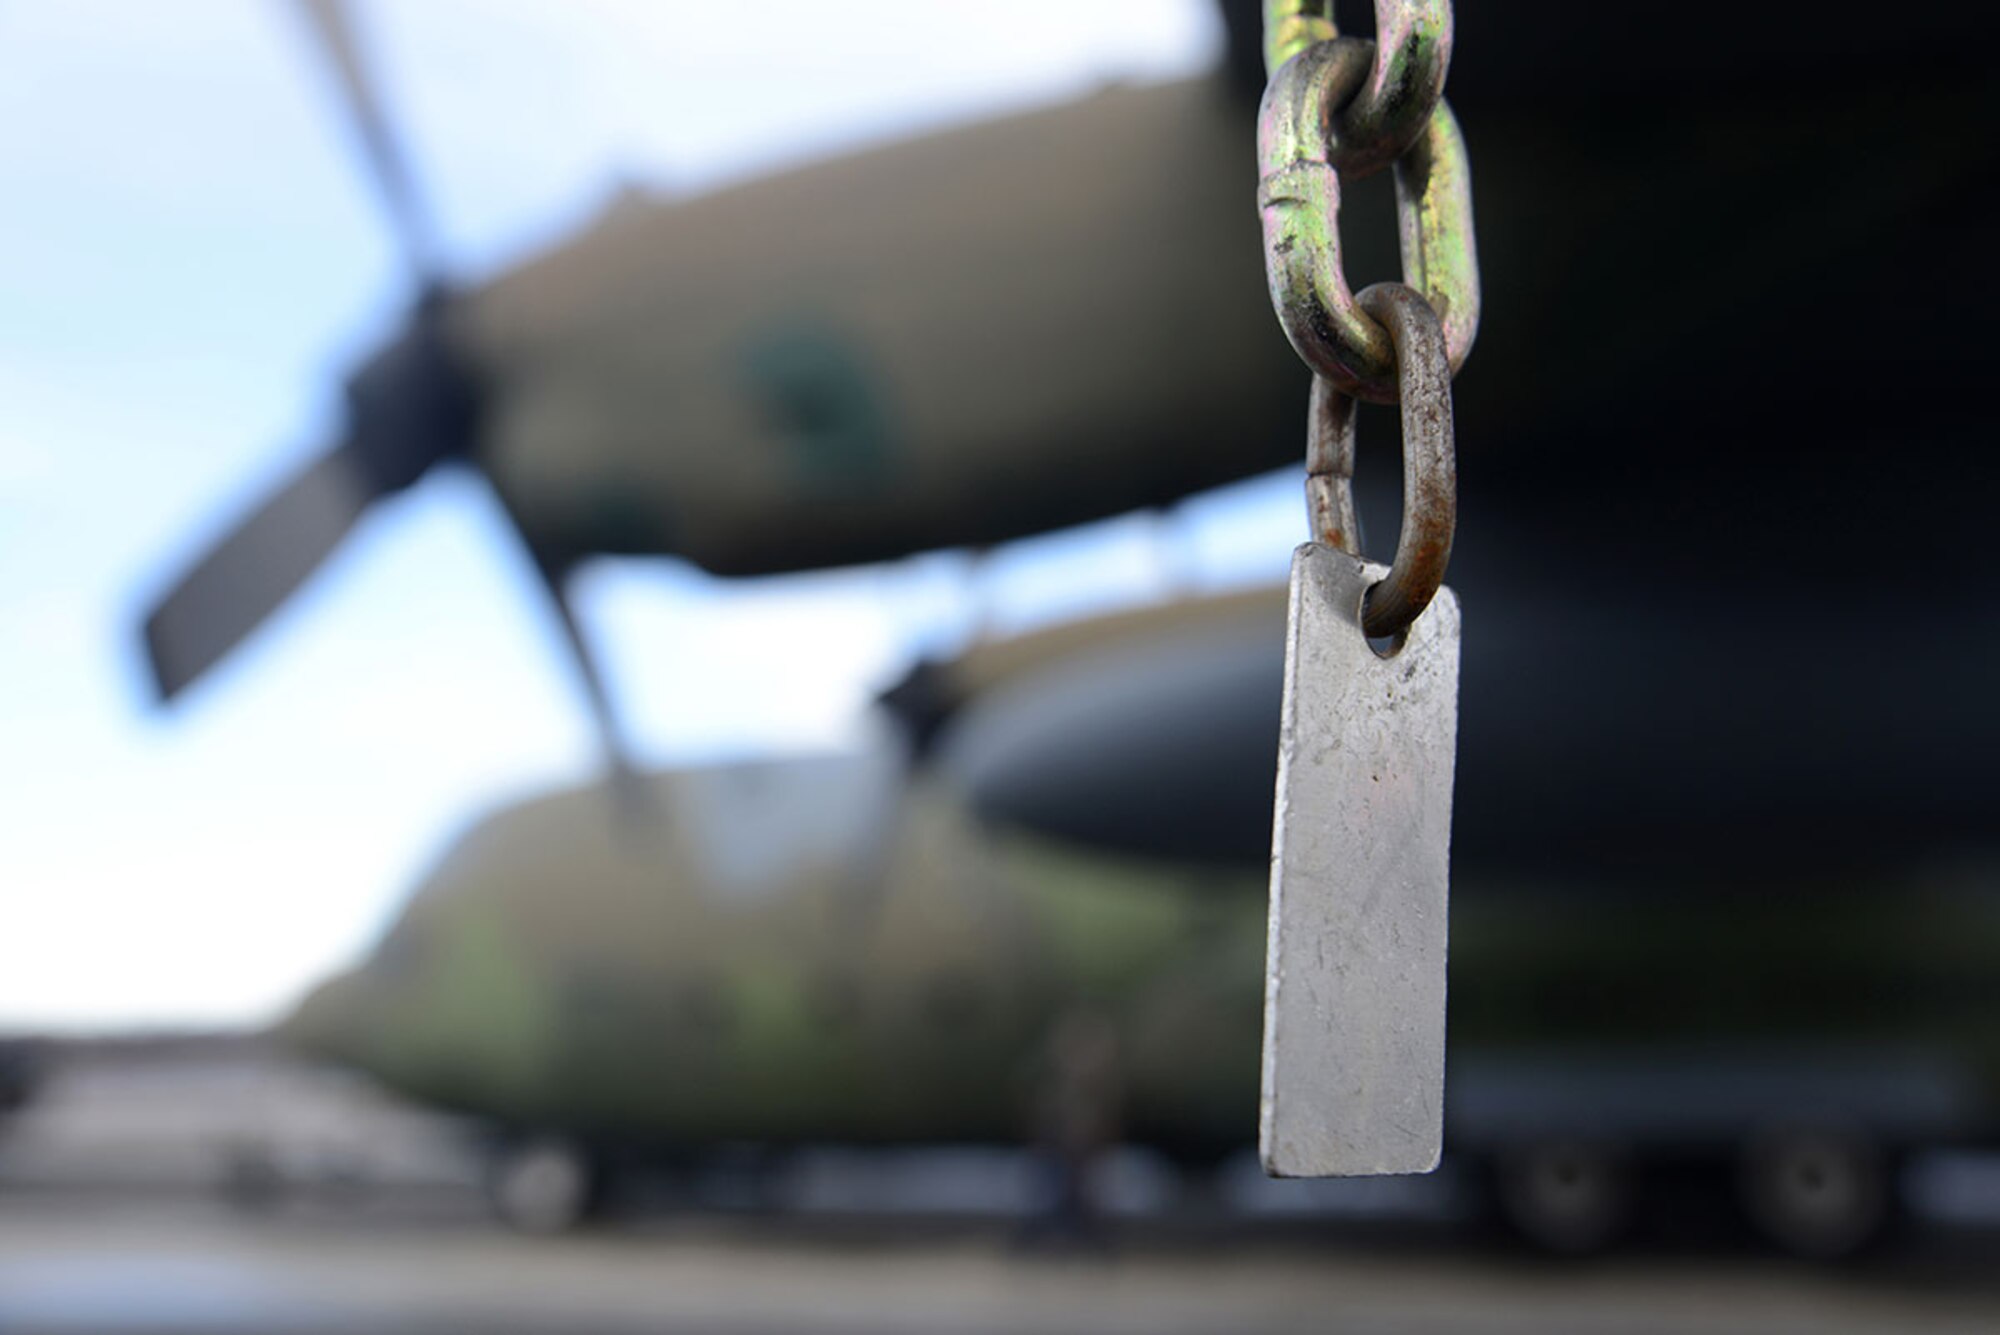 A chain hangs from a wing of the C-130 Hercules as it is towed at Joint Base Elmendorf-Richardson Feb. 27, 2016. The aircraft has been towed to Hangar 21 for refurbishment and is scheduled to return to Heritage Park in April. (U.S. Air Force photo by Airman 1st Class Christopher R. Morales)